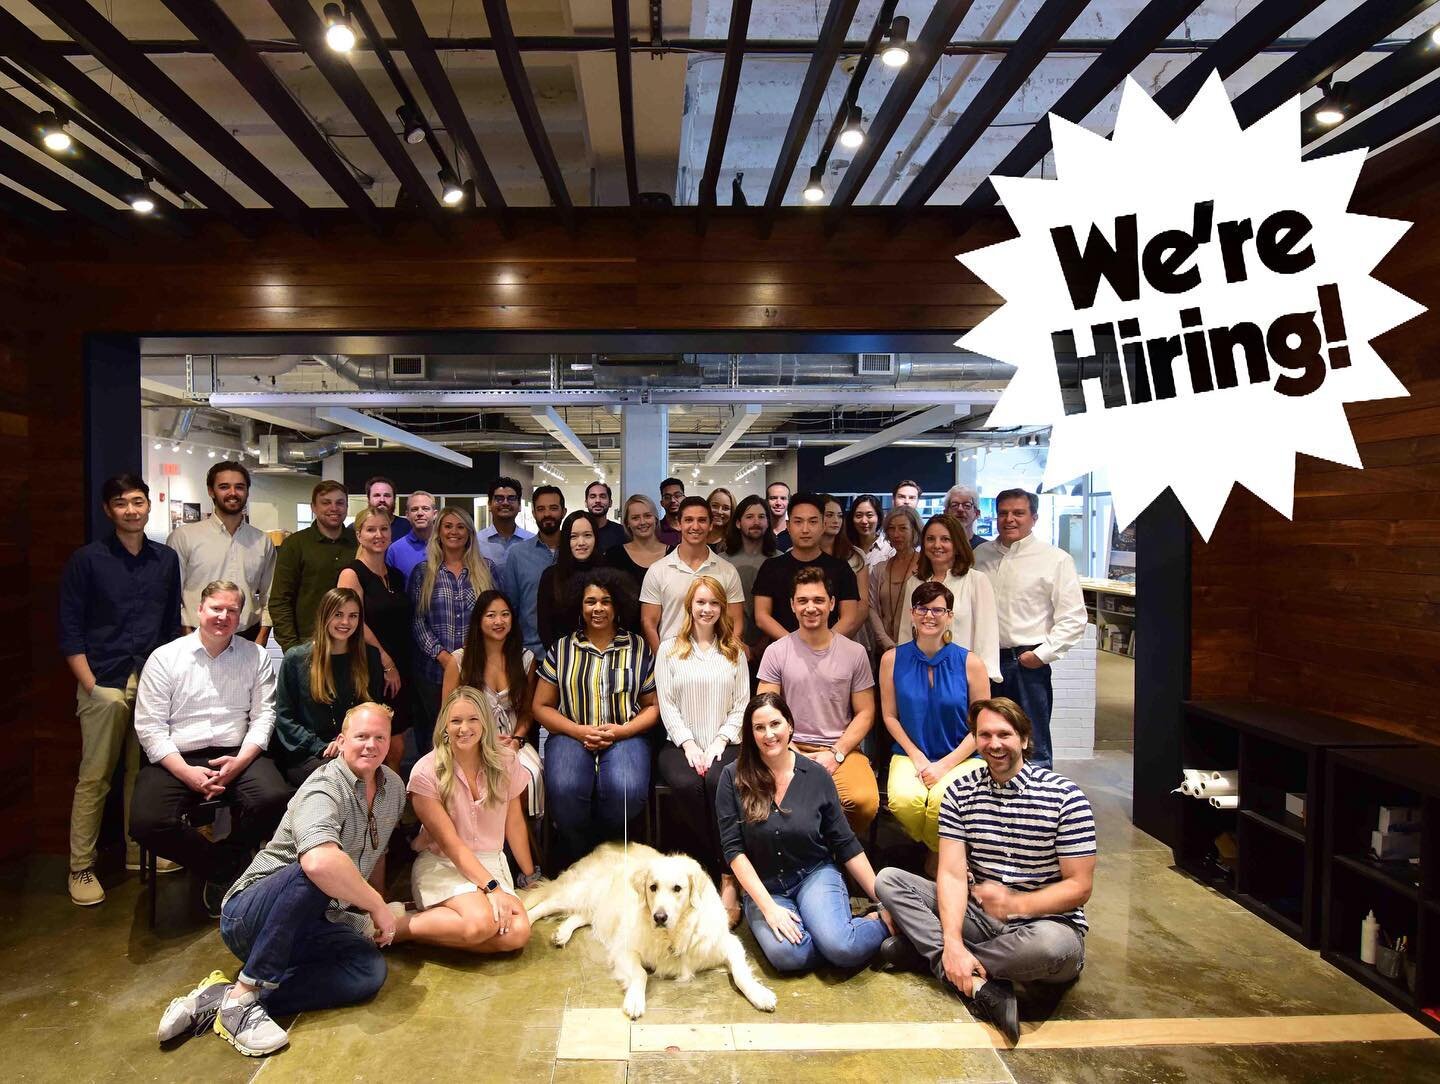 Join our team! Details below.

BLUR Workshop is a full service design practice that offers a collaborative work environment for Architects and Interior Designers. 

We are currently seeking Architects with 5-8 years of experience to  help lead projec